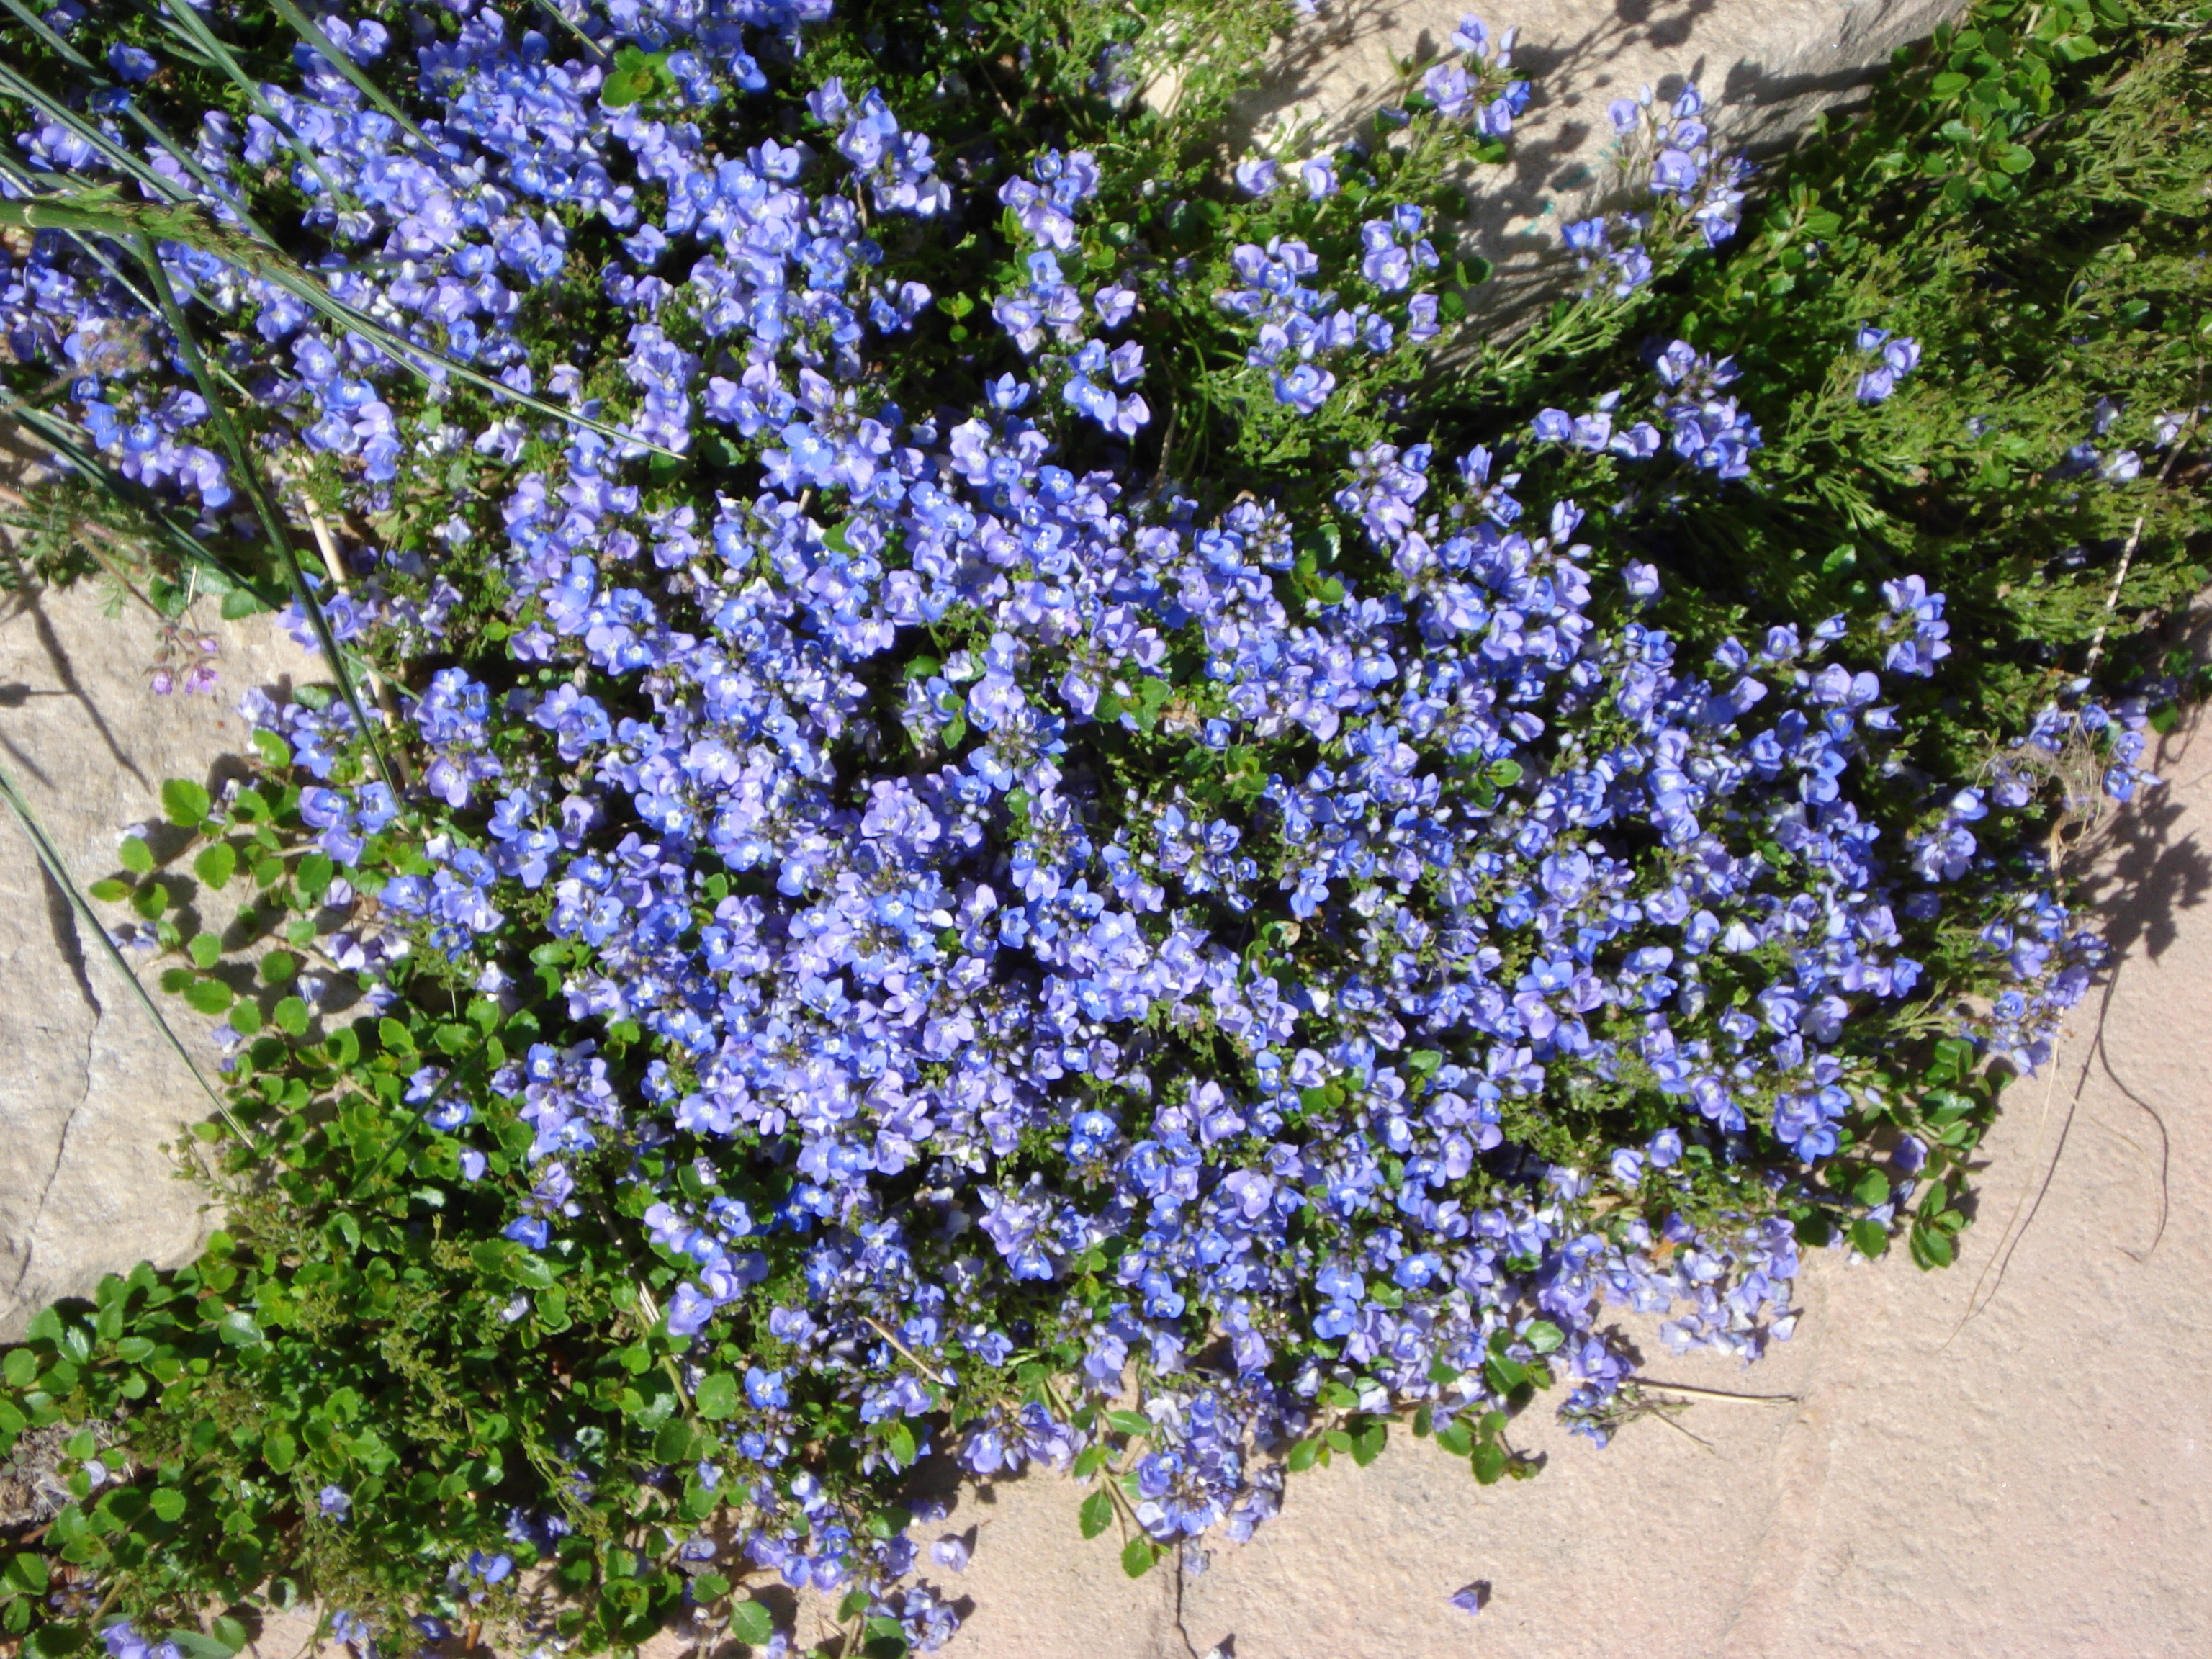 Russian Thyme blossoms